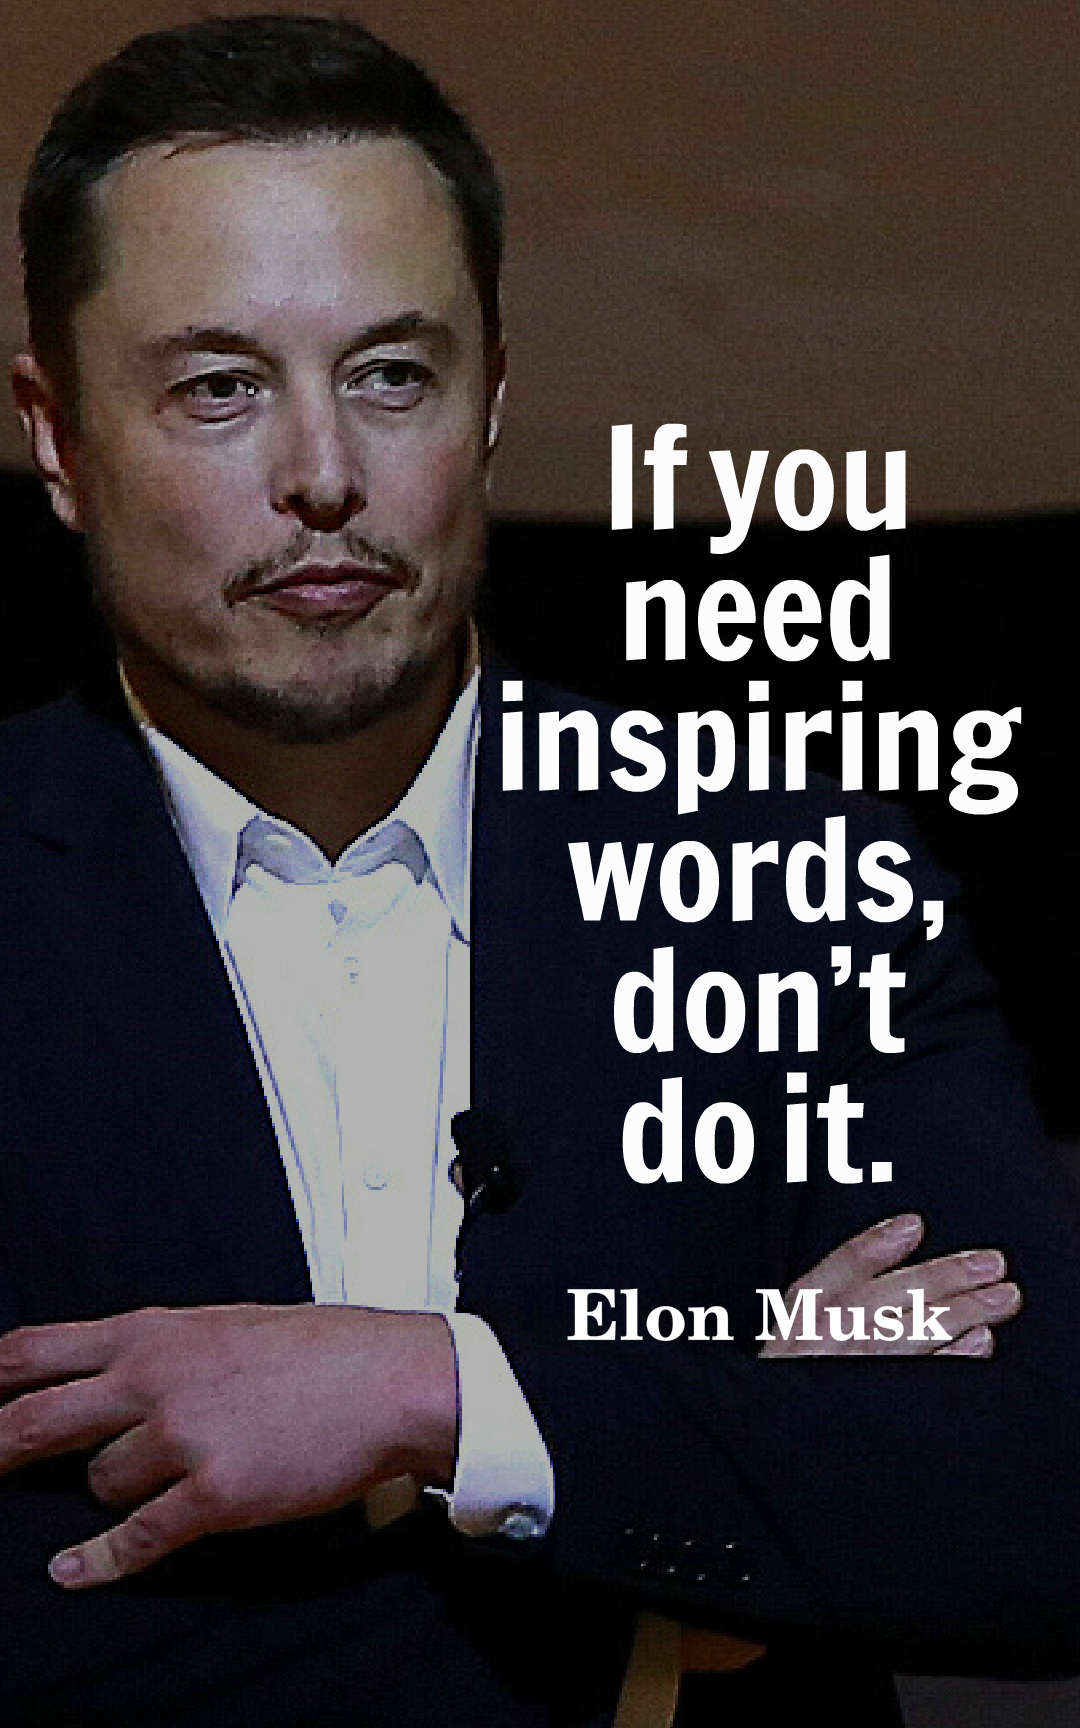 If you need inspiring words, don’t do it.